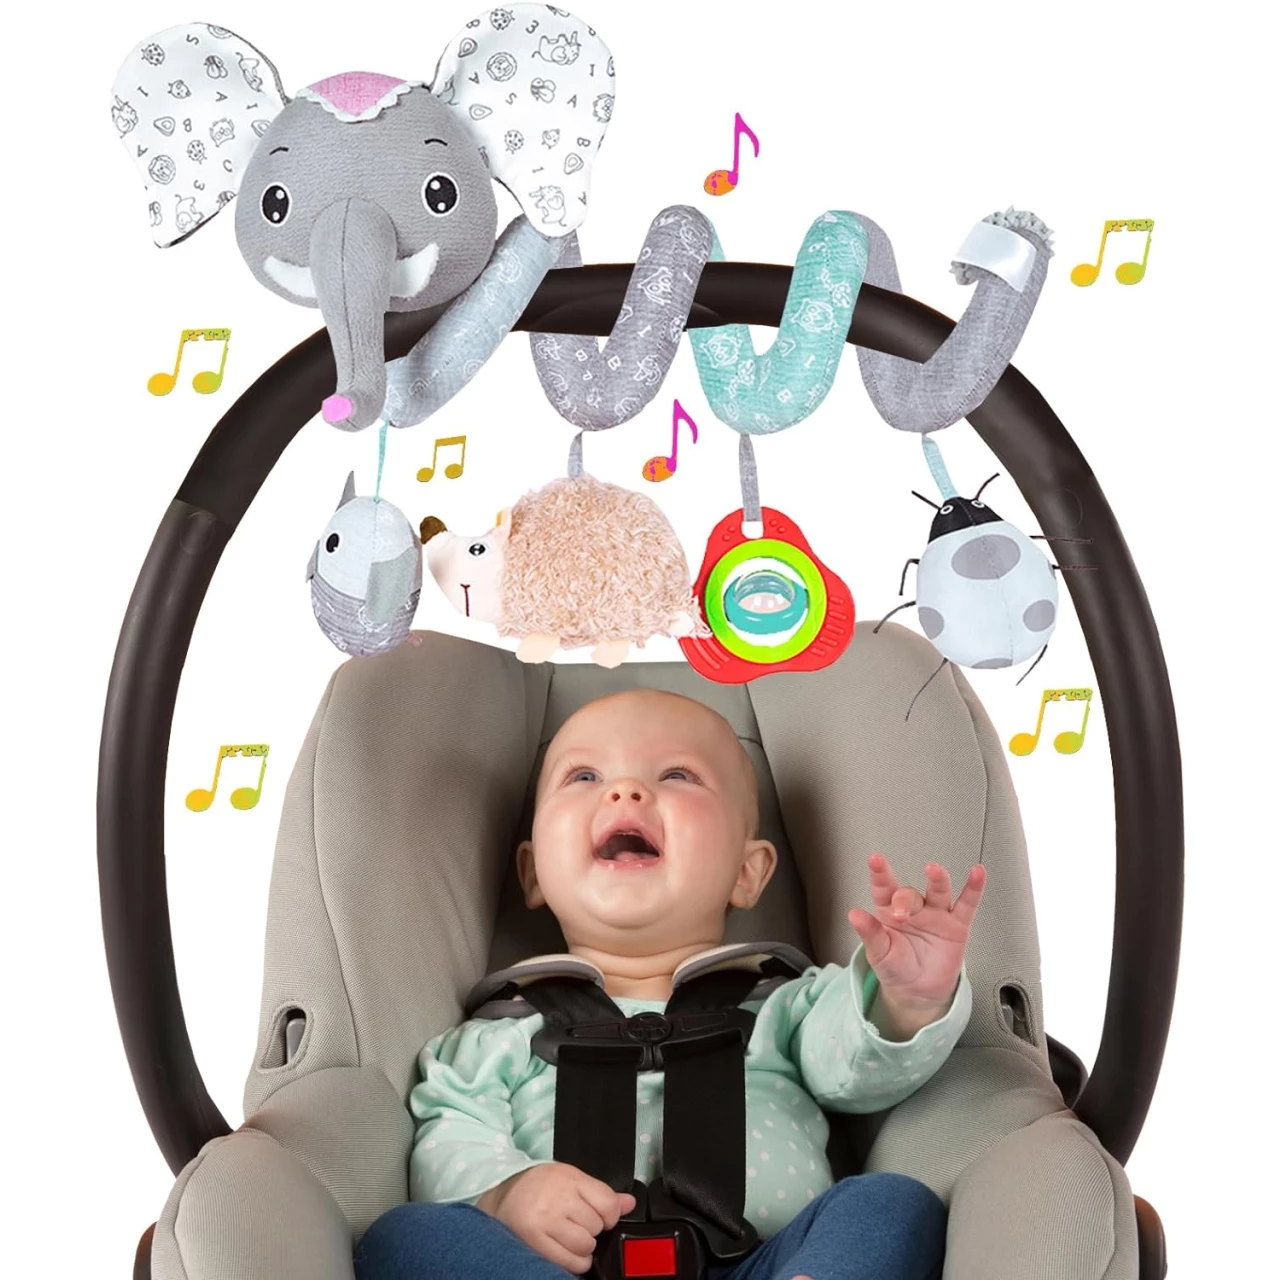 Baby Car Seat Toys, Infant Activity Spiral Toys Hanging Stroller Toys for Baby